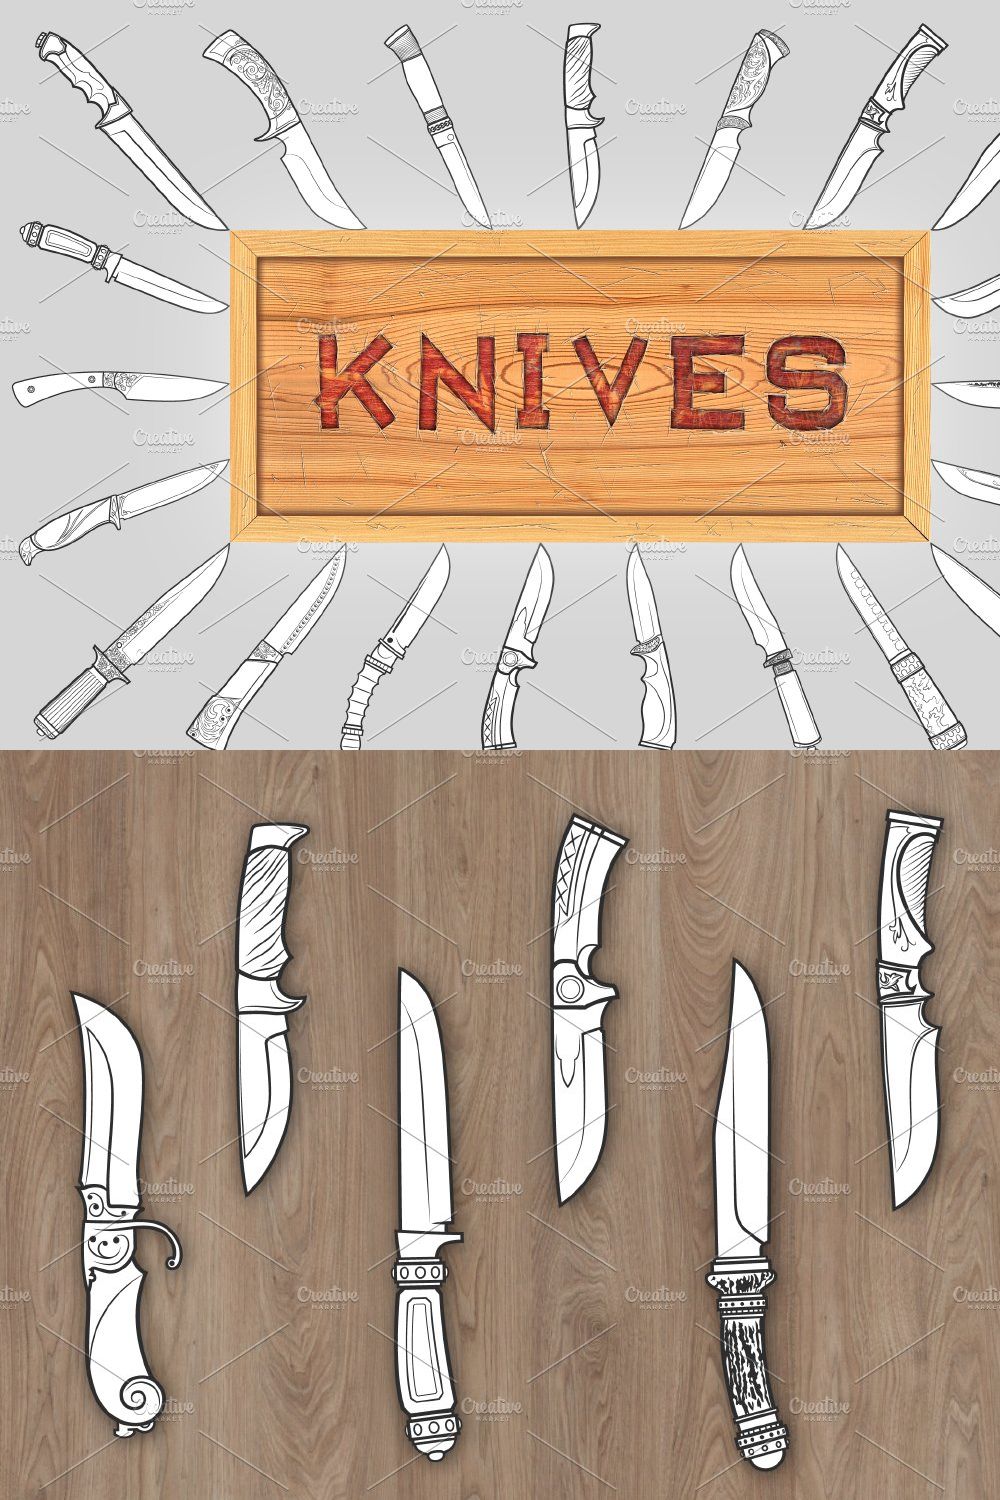 Knives pinterest preview image.